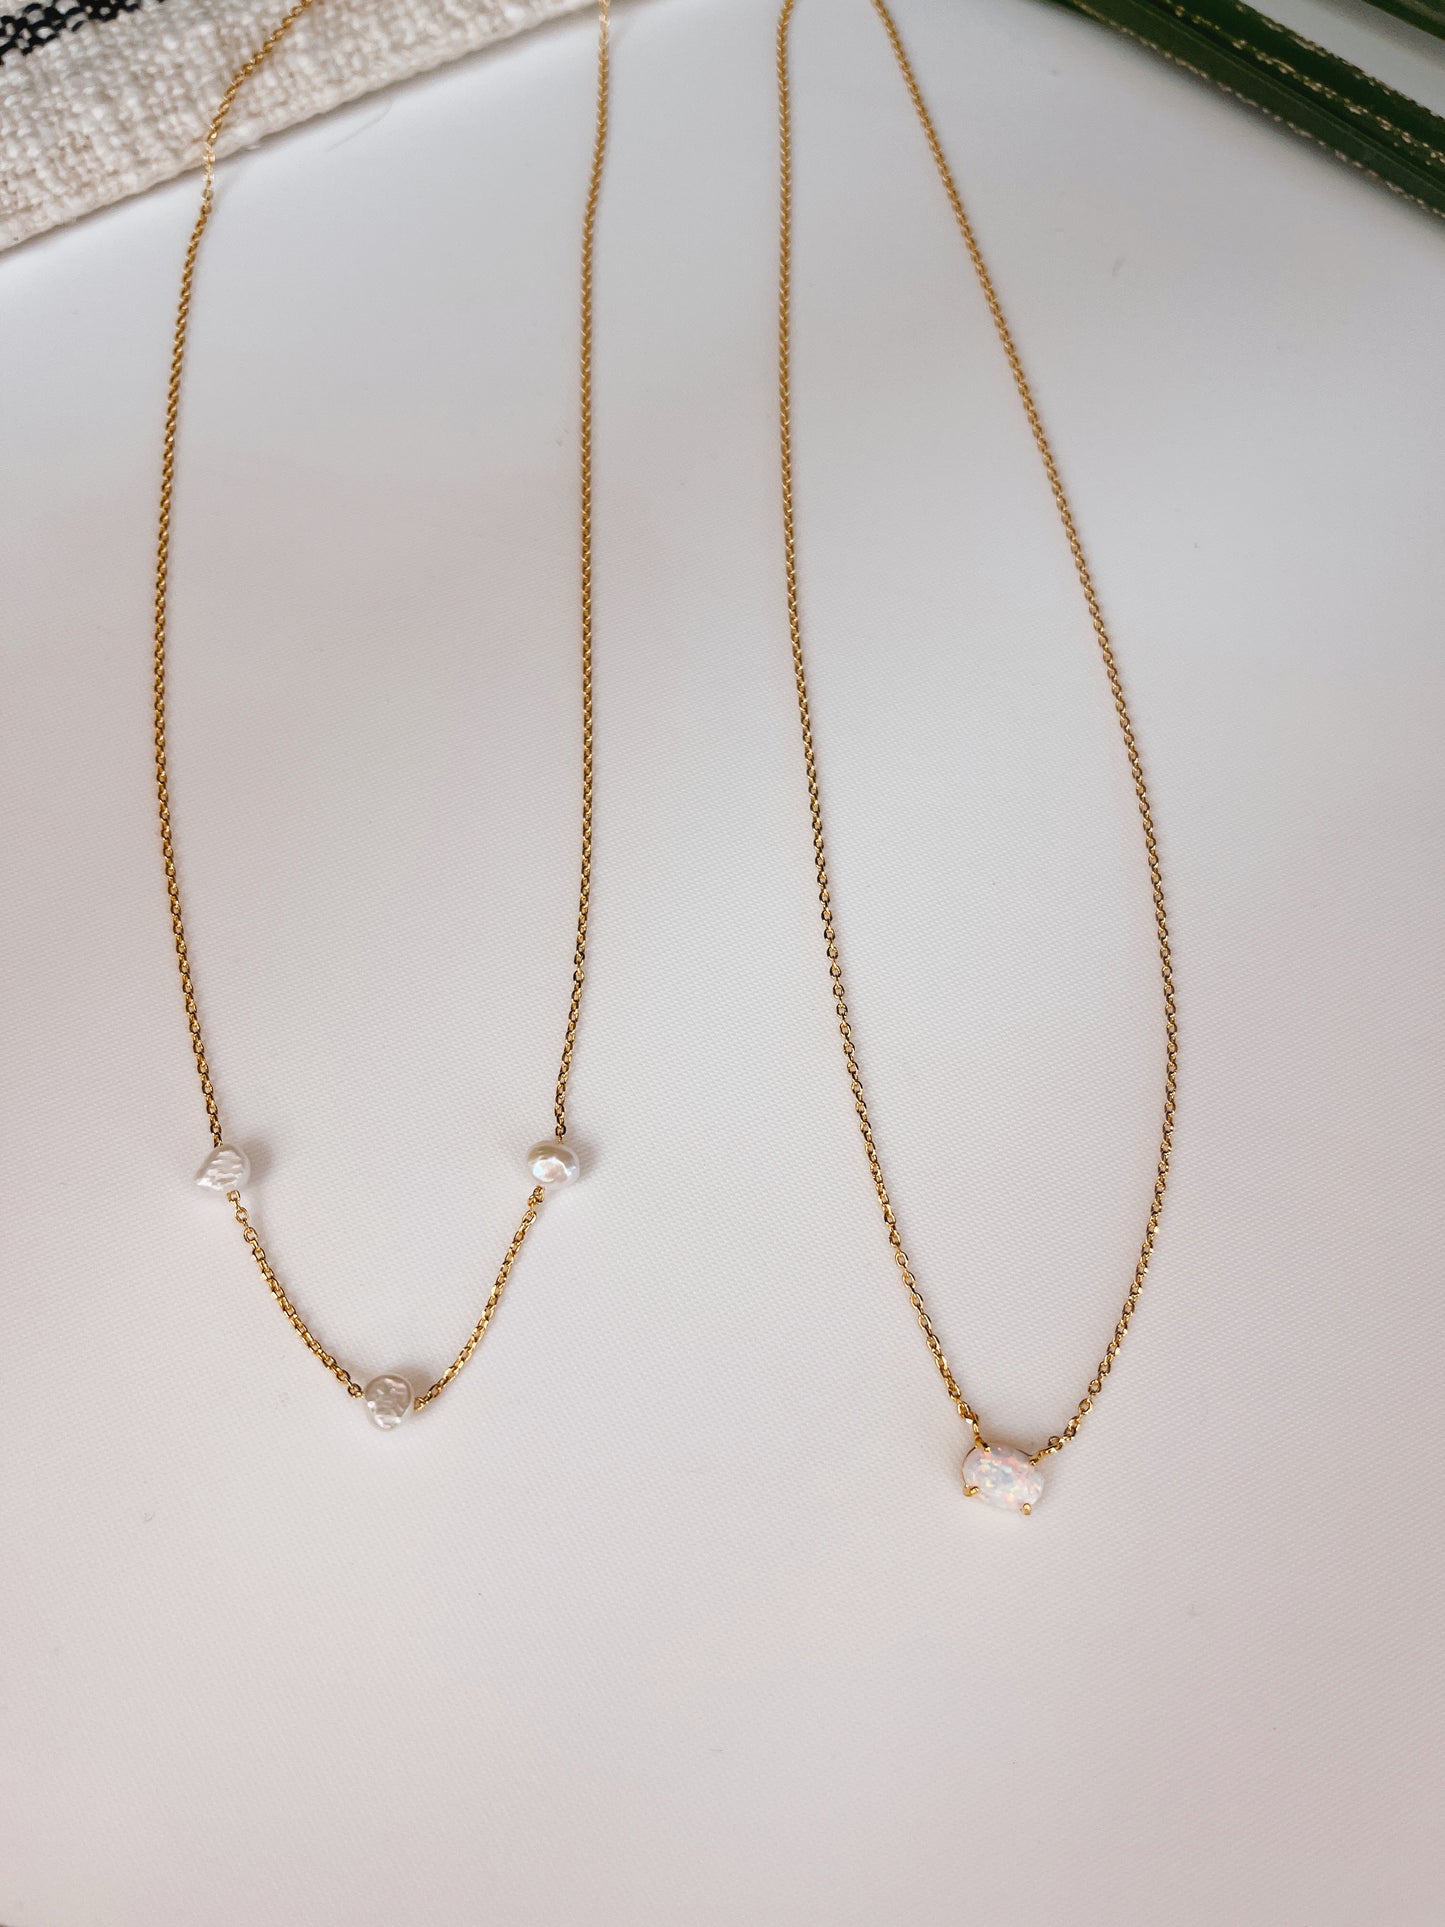 "Arielle" pearl necklace